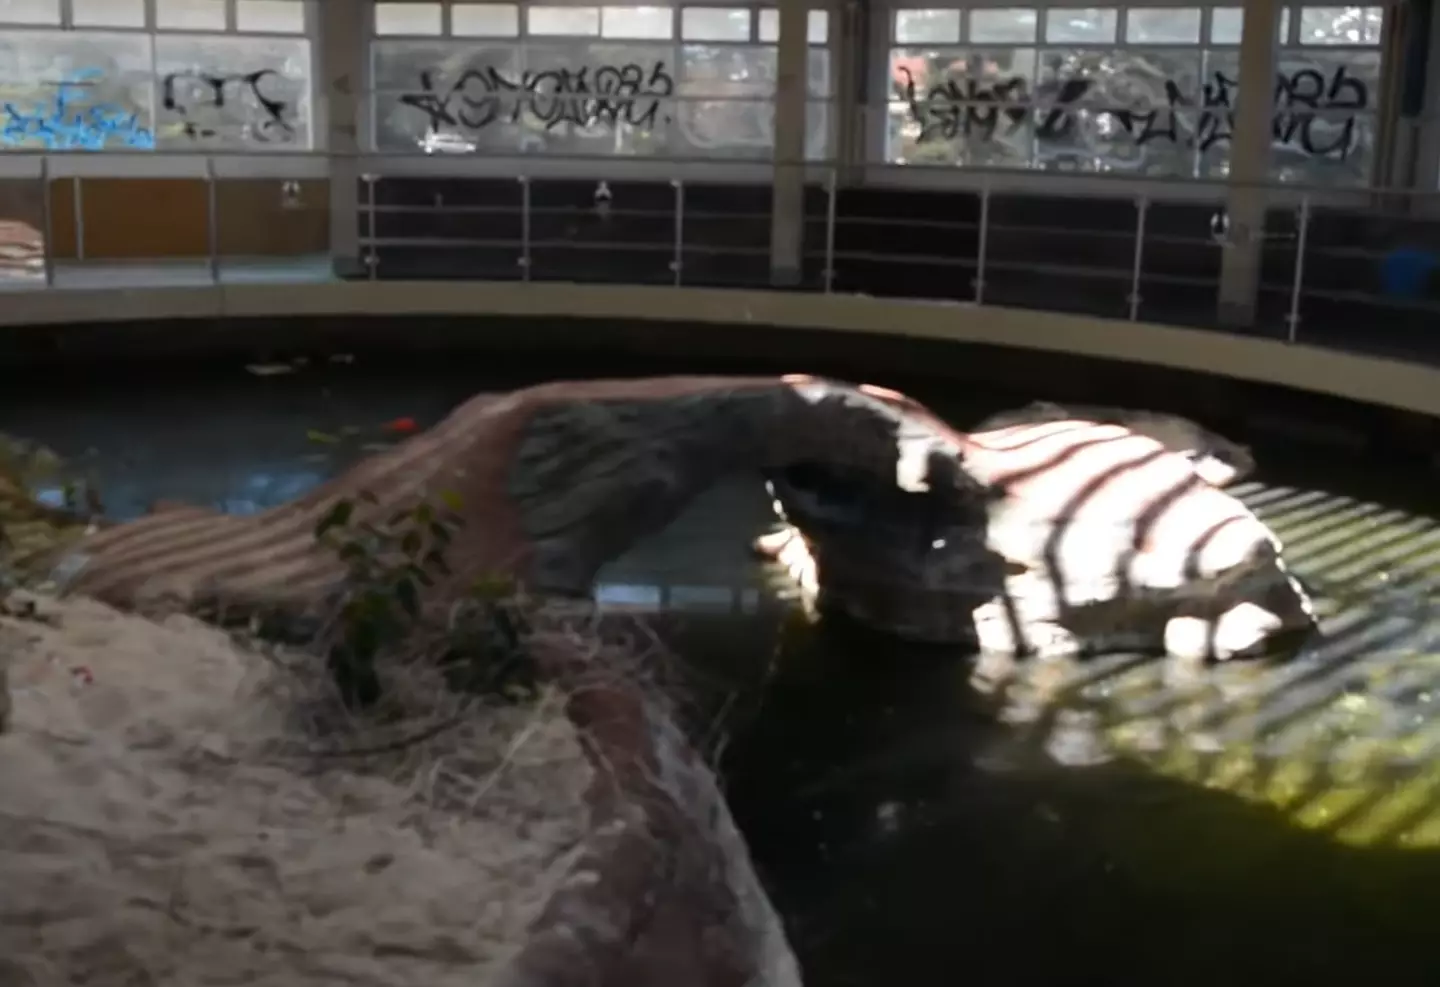 Five years on from shutting down for good the abandoned aquarium is a sorry sight.